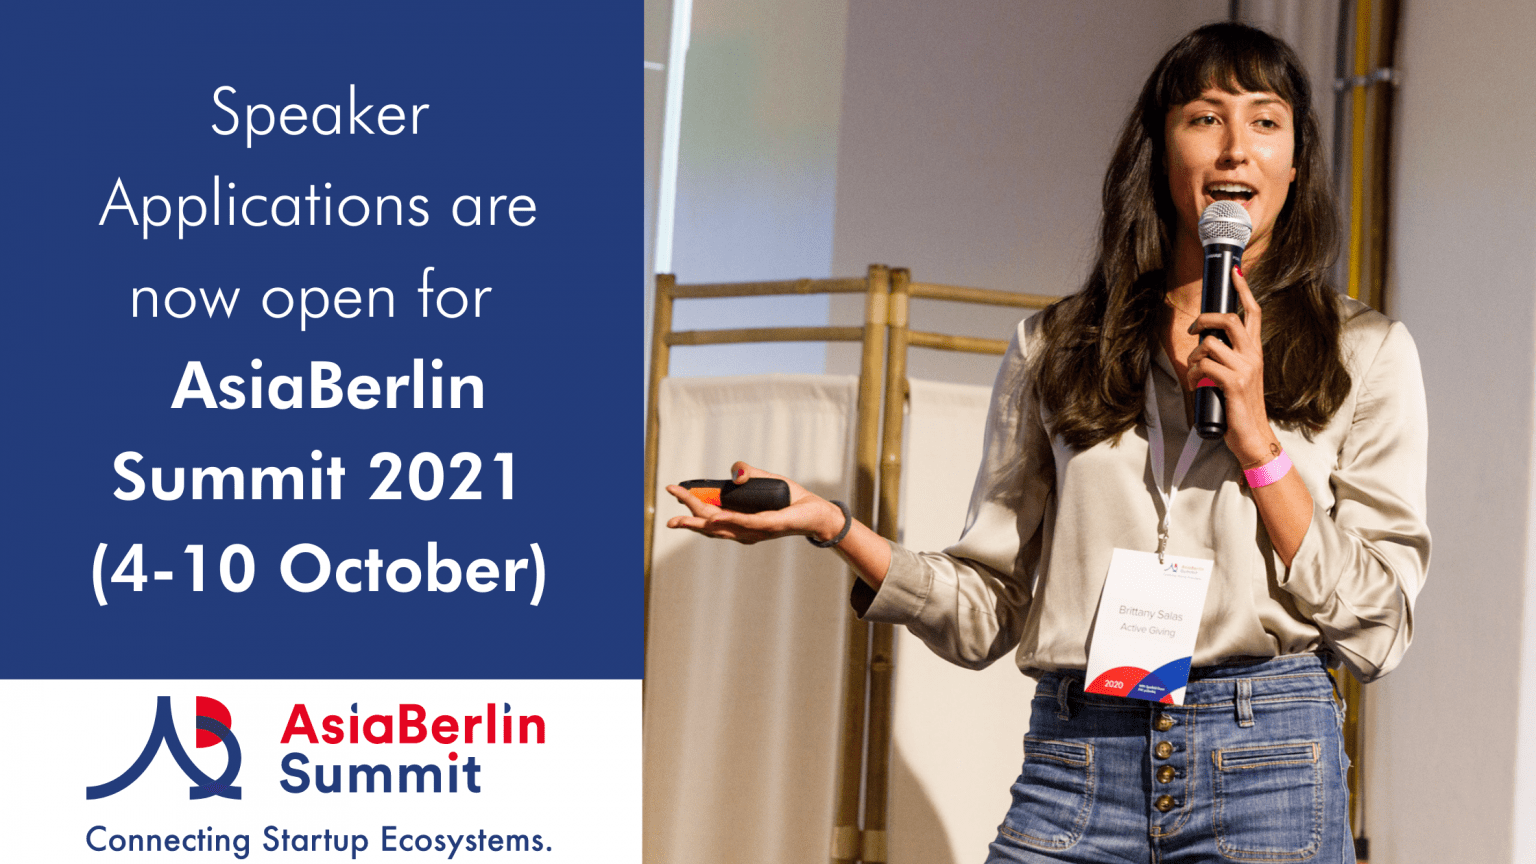 Calling Speakers and topic suggestions for AsiaBerlin Summit 2021